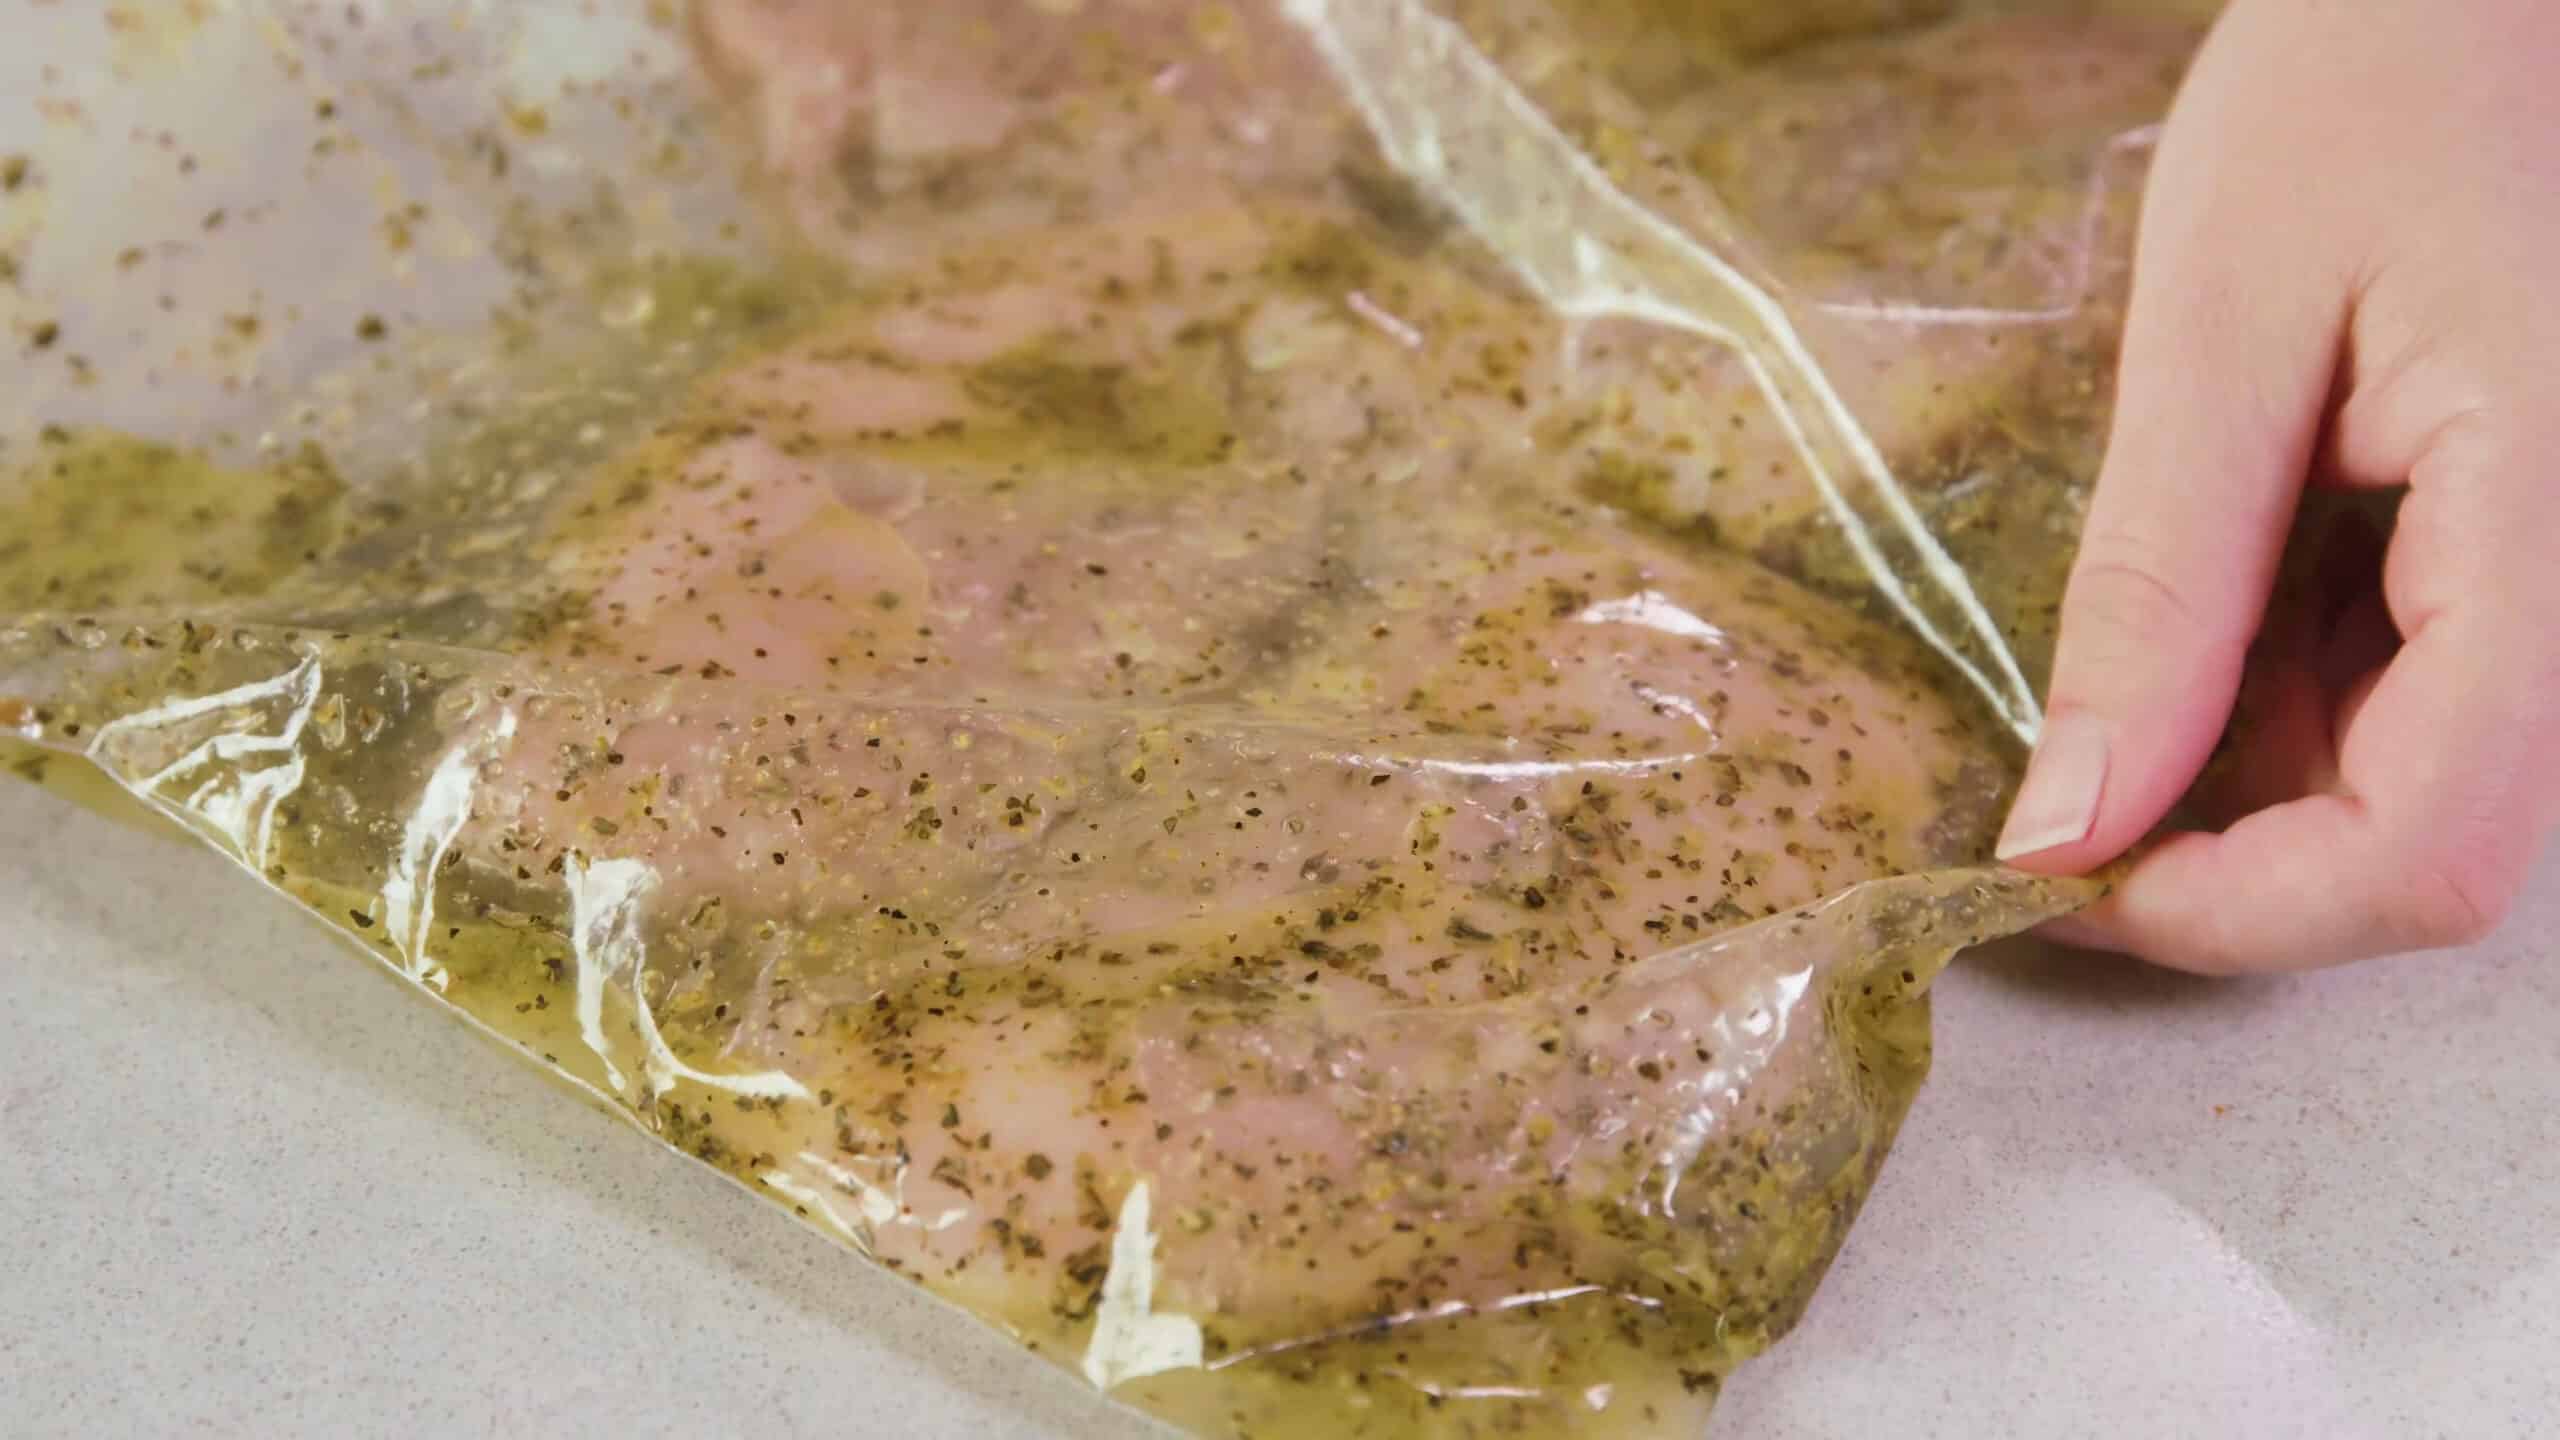 Close-up view of clear plastic seal top bag filled with lemon herb marinade and chicken breast meat to display proper coating of the meat.